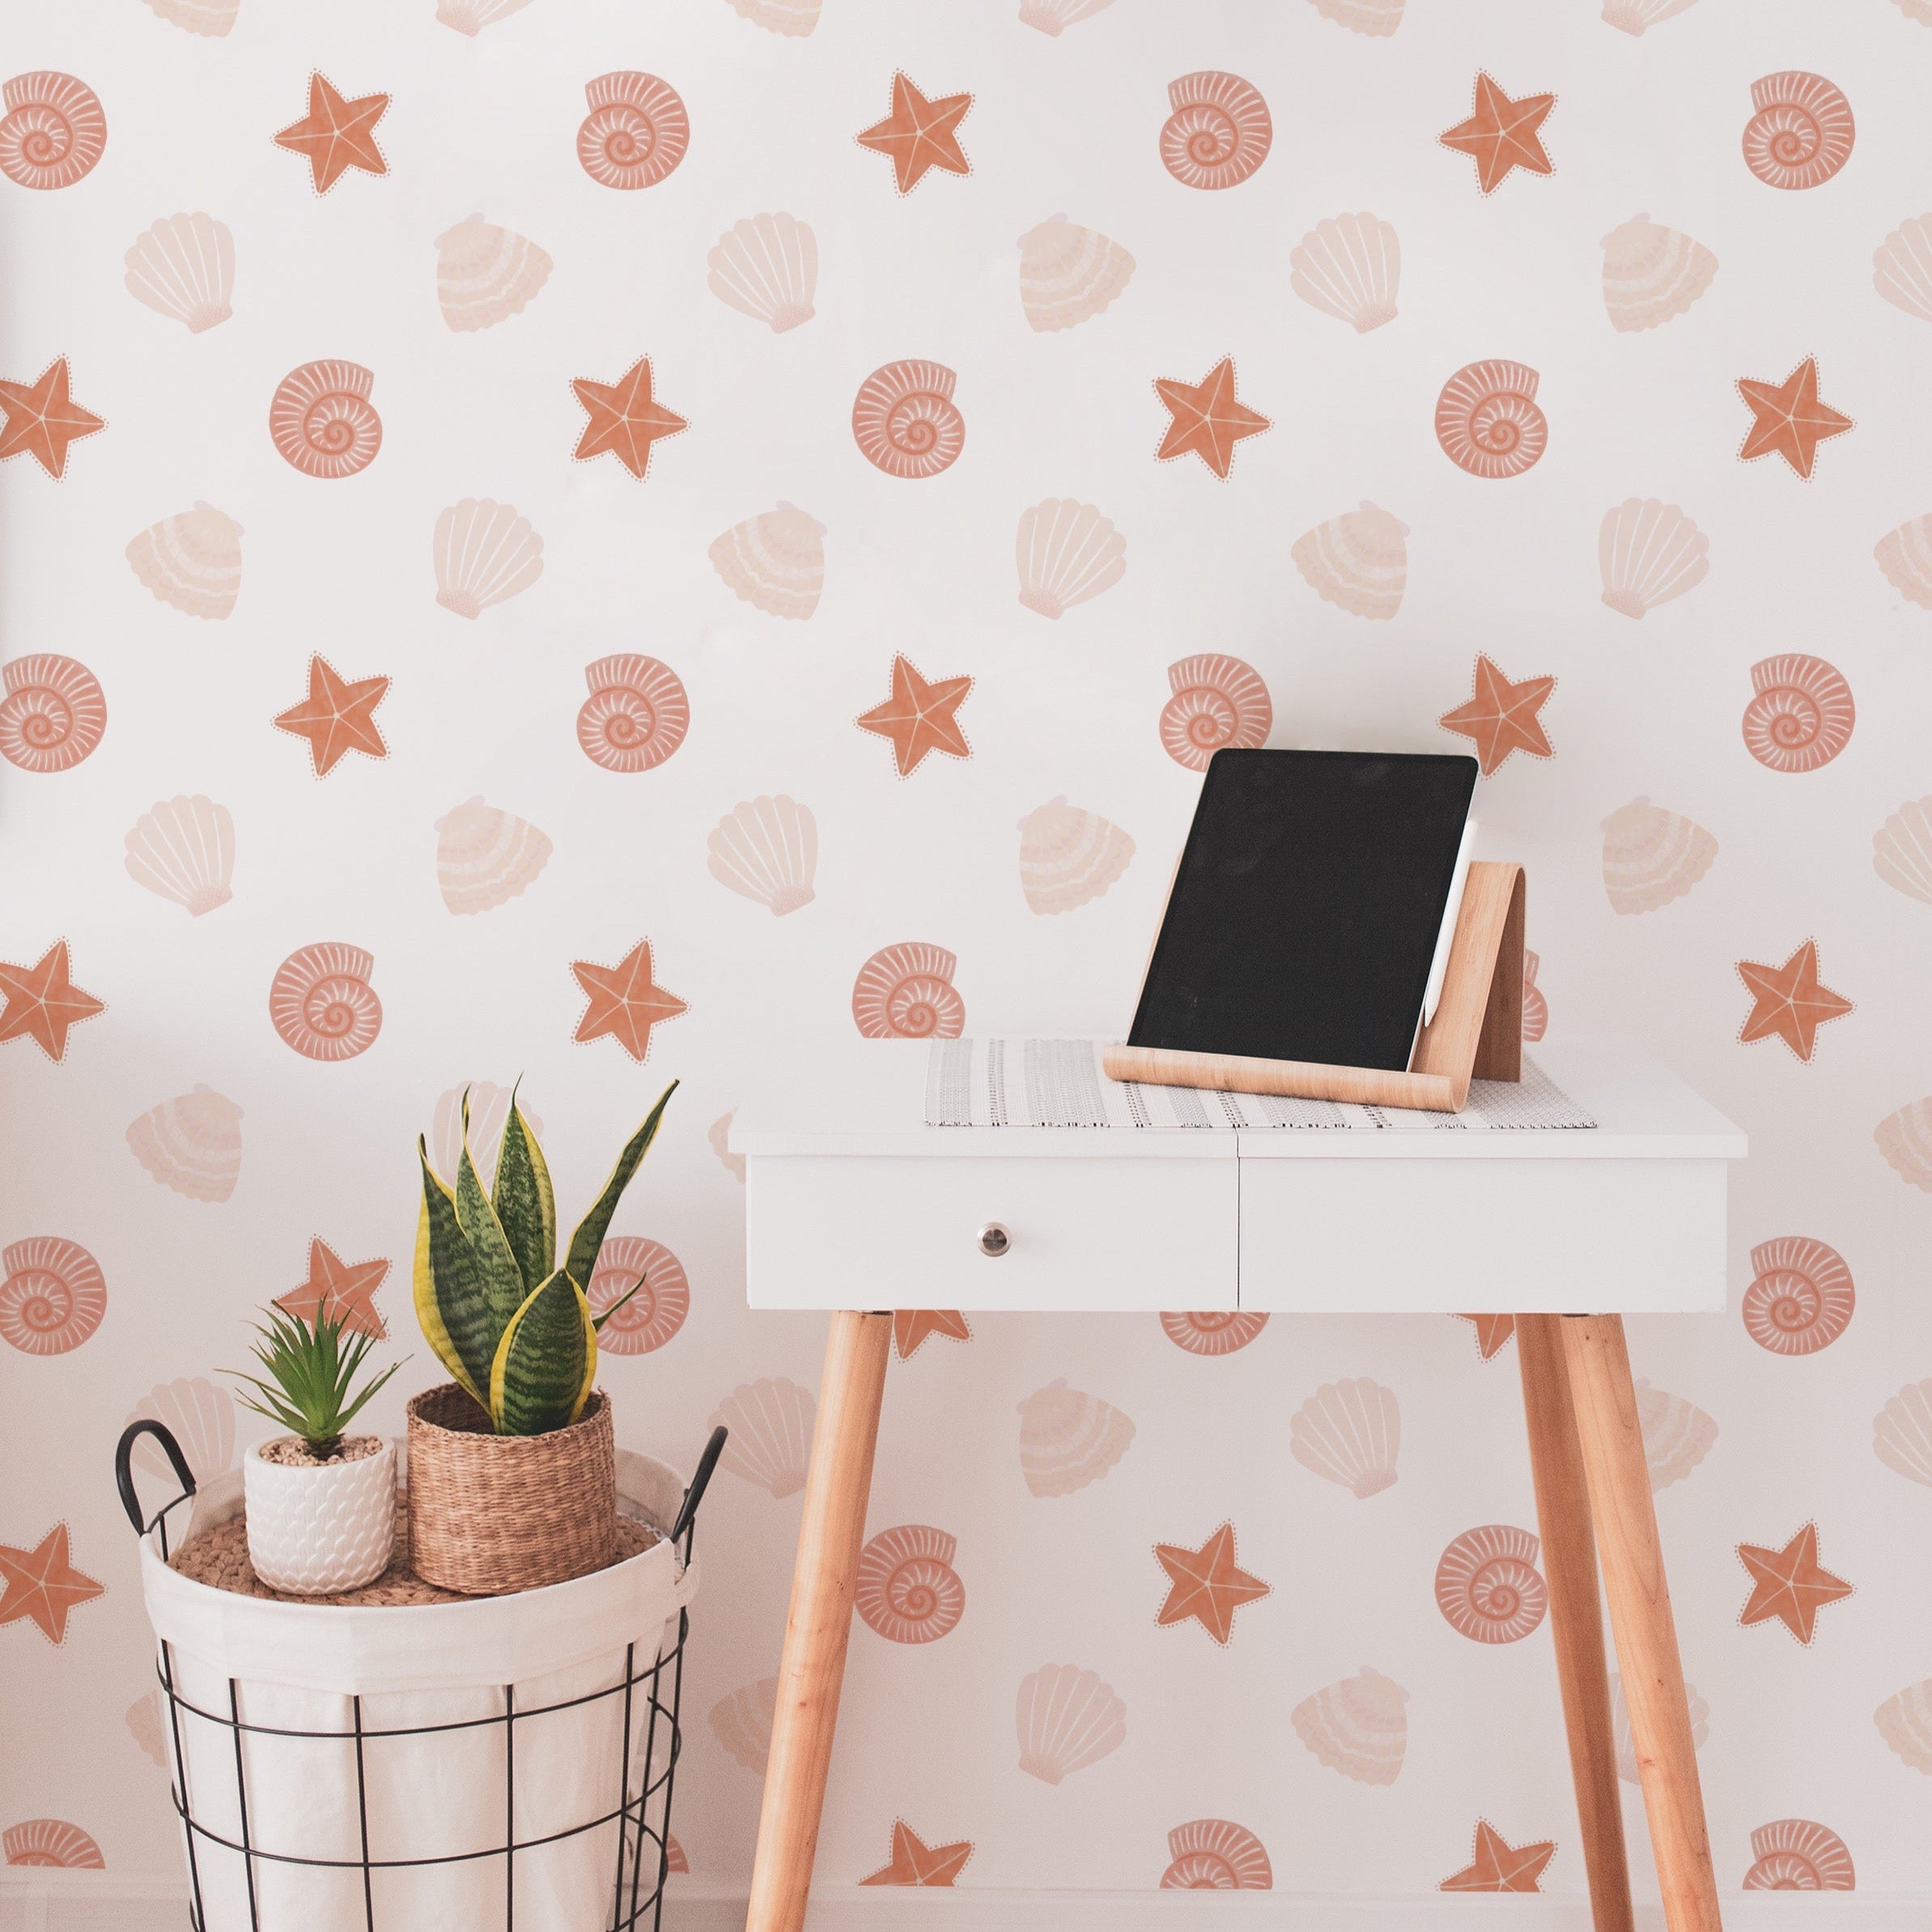 A chic home office setup with Mermaid Shells Wallpaper, creating a bright and inviting workspace. The wall features a pattern of delicate seashells and starfish, complemented by a modern white desk and green houseplants.